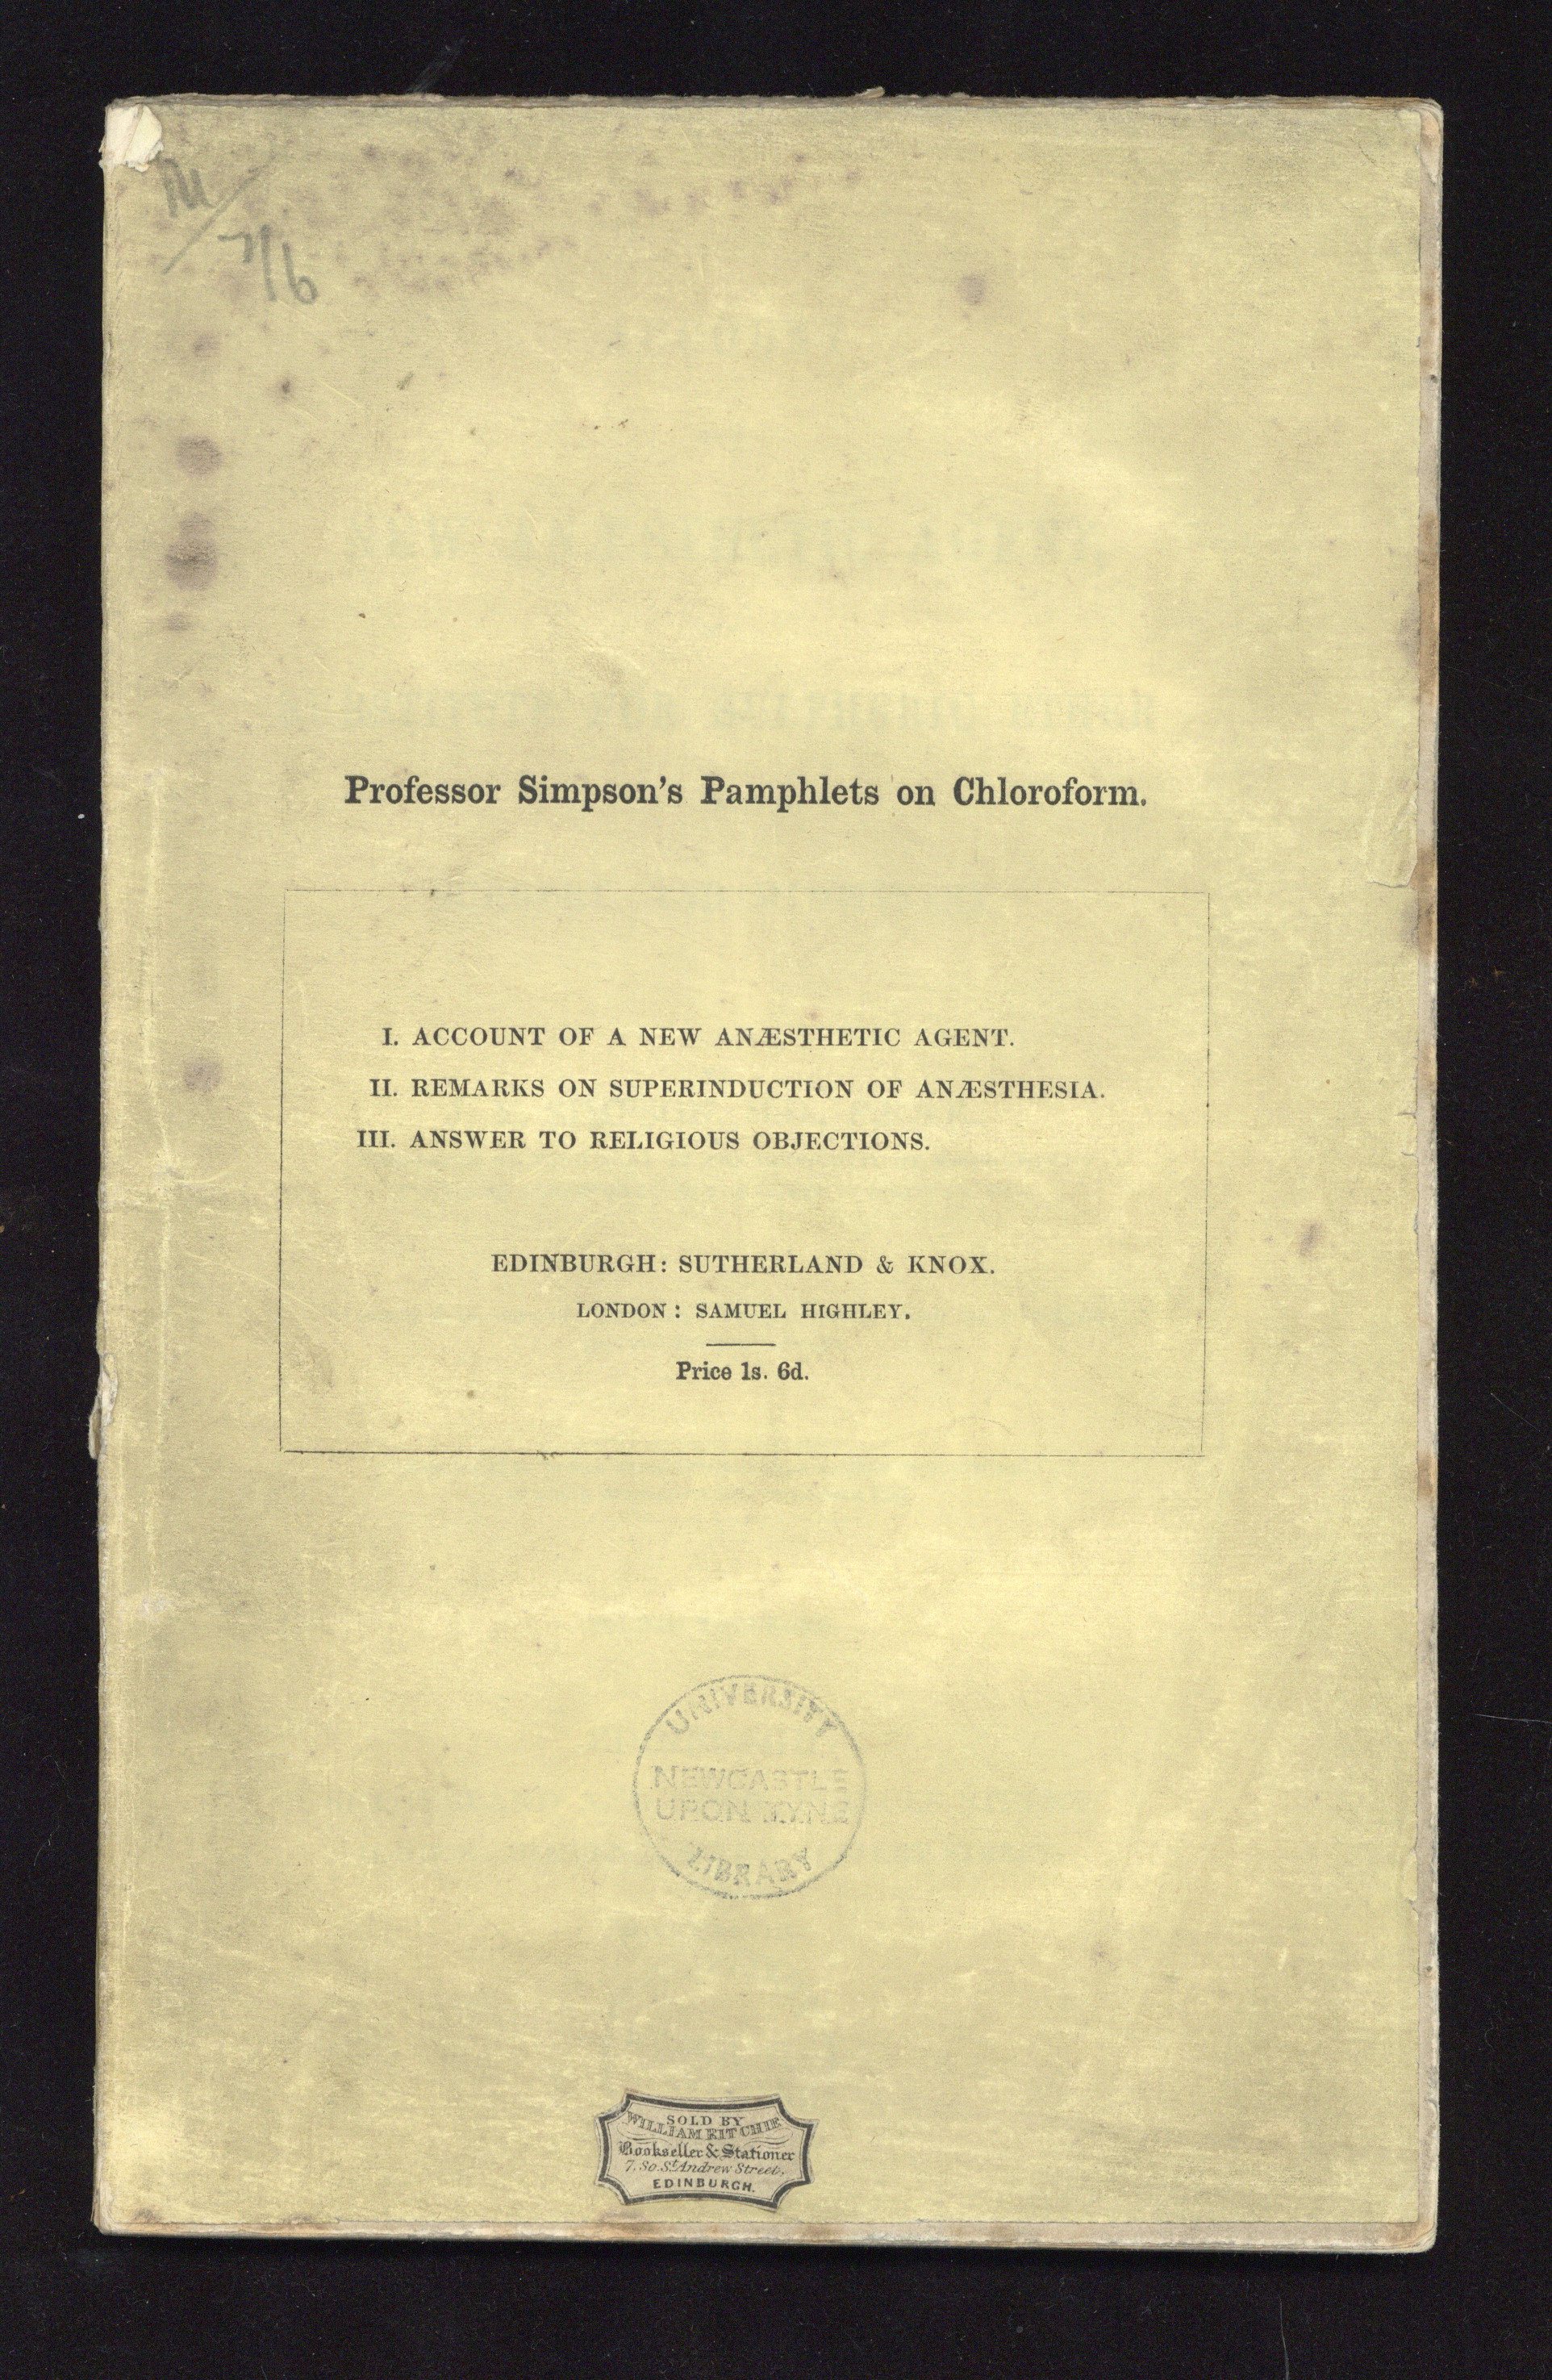 <p>Front cover of ‘Professor Simpson’s Pamphlets on Chloroform’. This contains three pamphlets, the first is an ‘Account of a New Anaesthetic Agent’, the second is ‘Remarks on Superinduction of Anaesthetia’ and the third is ‘Answer to Religous Objections’. Simpson was the first person to demonstrate that Chlorofom could be used as an anaesthetic and popularised its use in medicine.</p>
